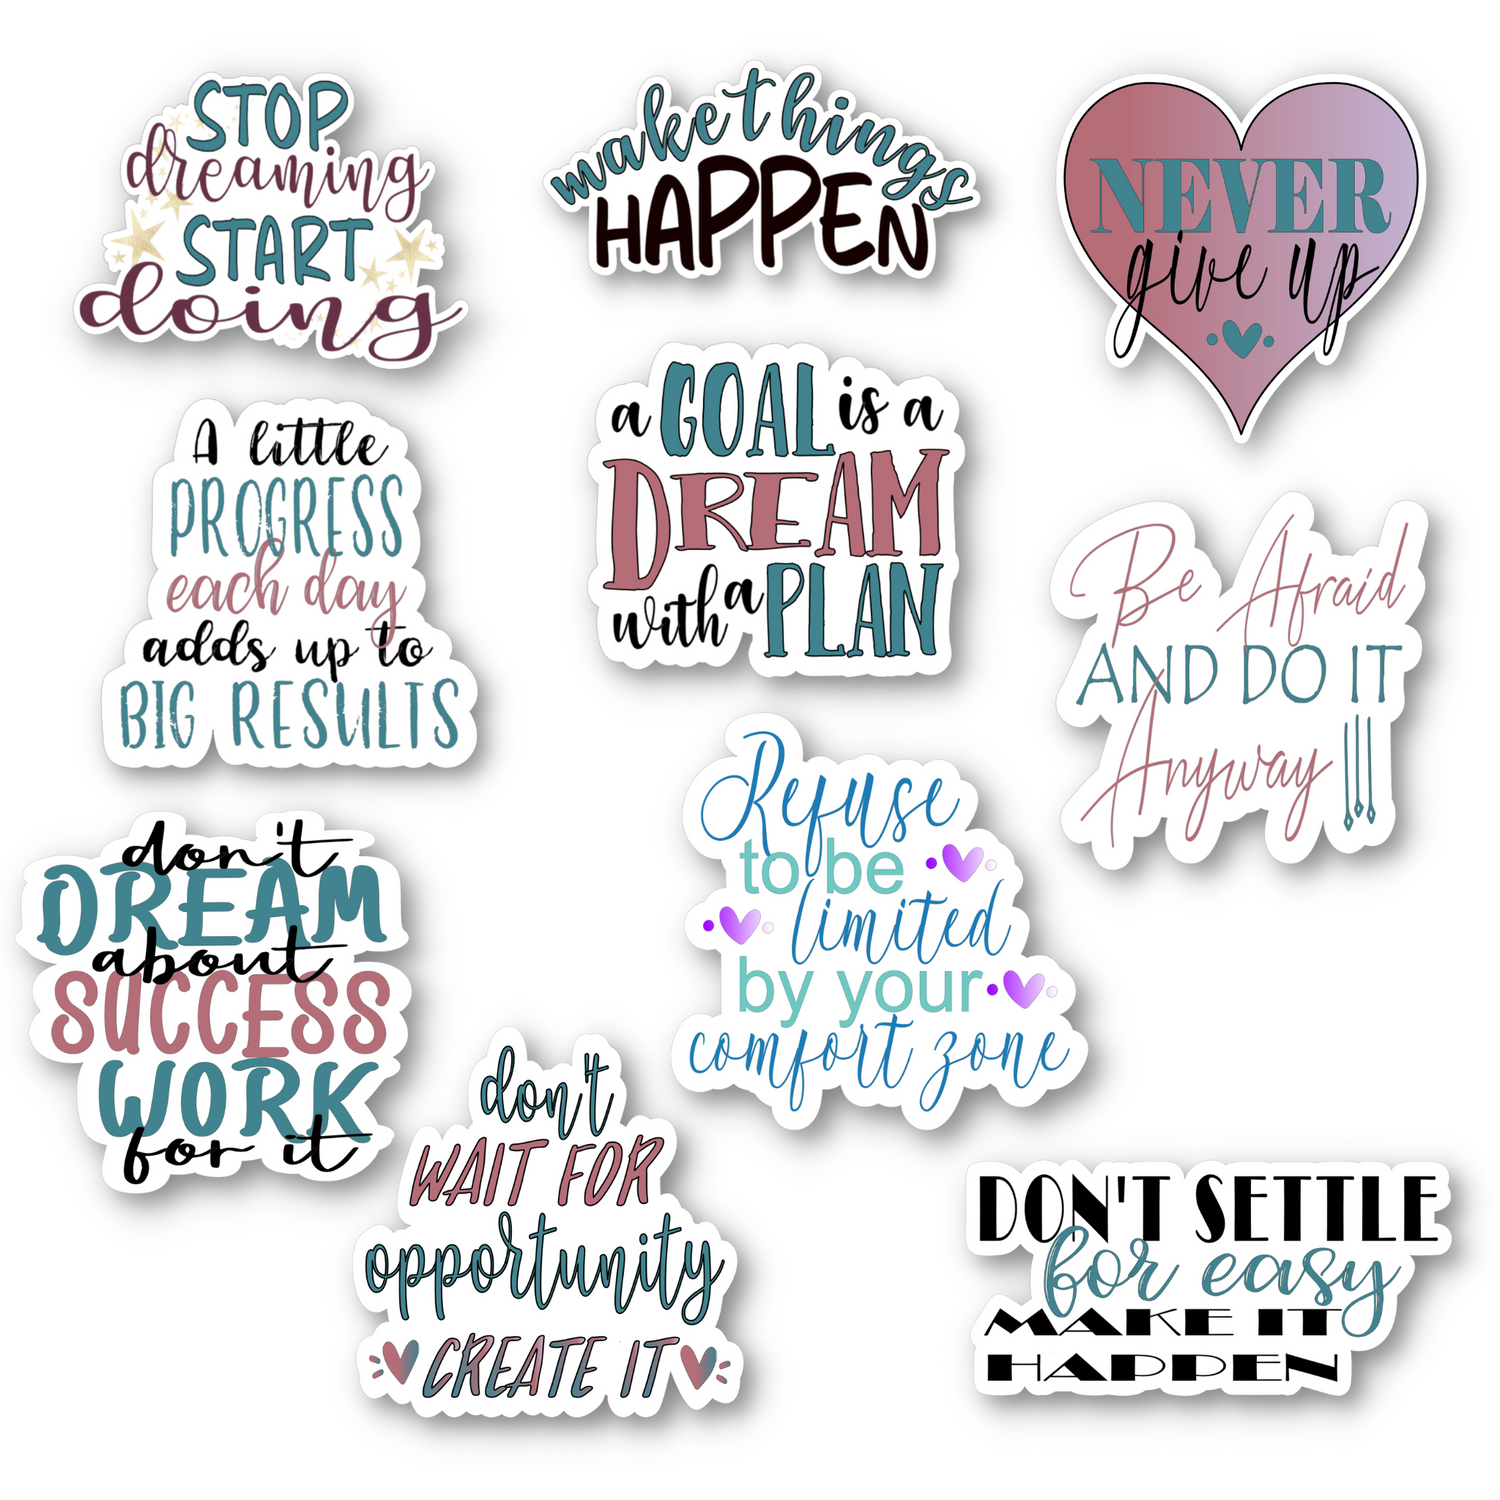 If You Don't Have Big Dreams & Goals Sticker